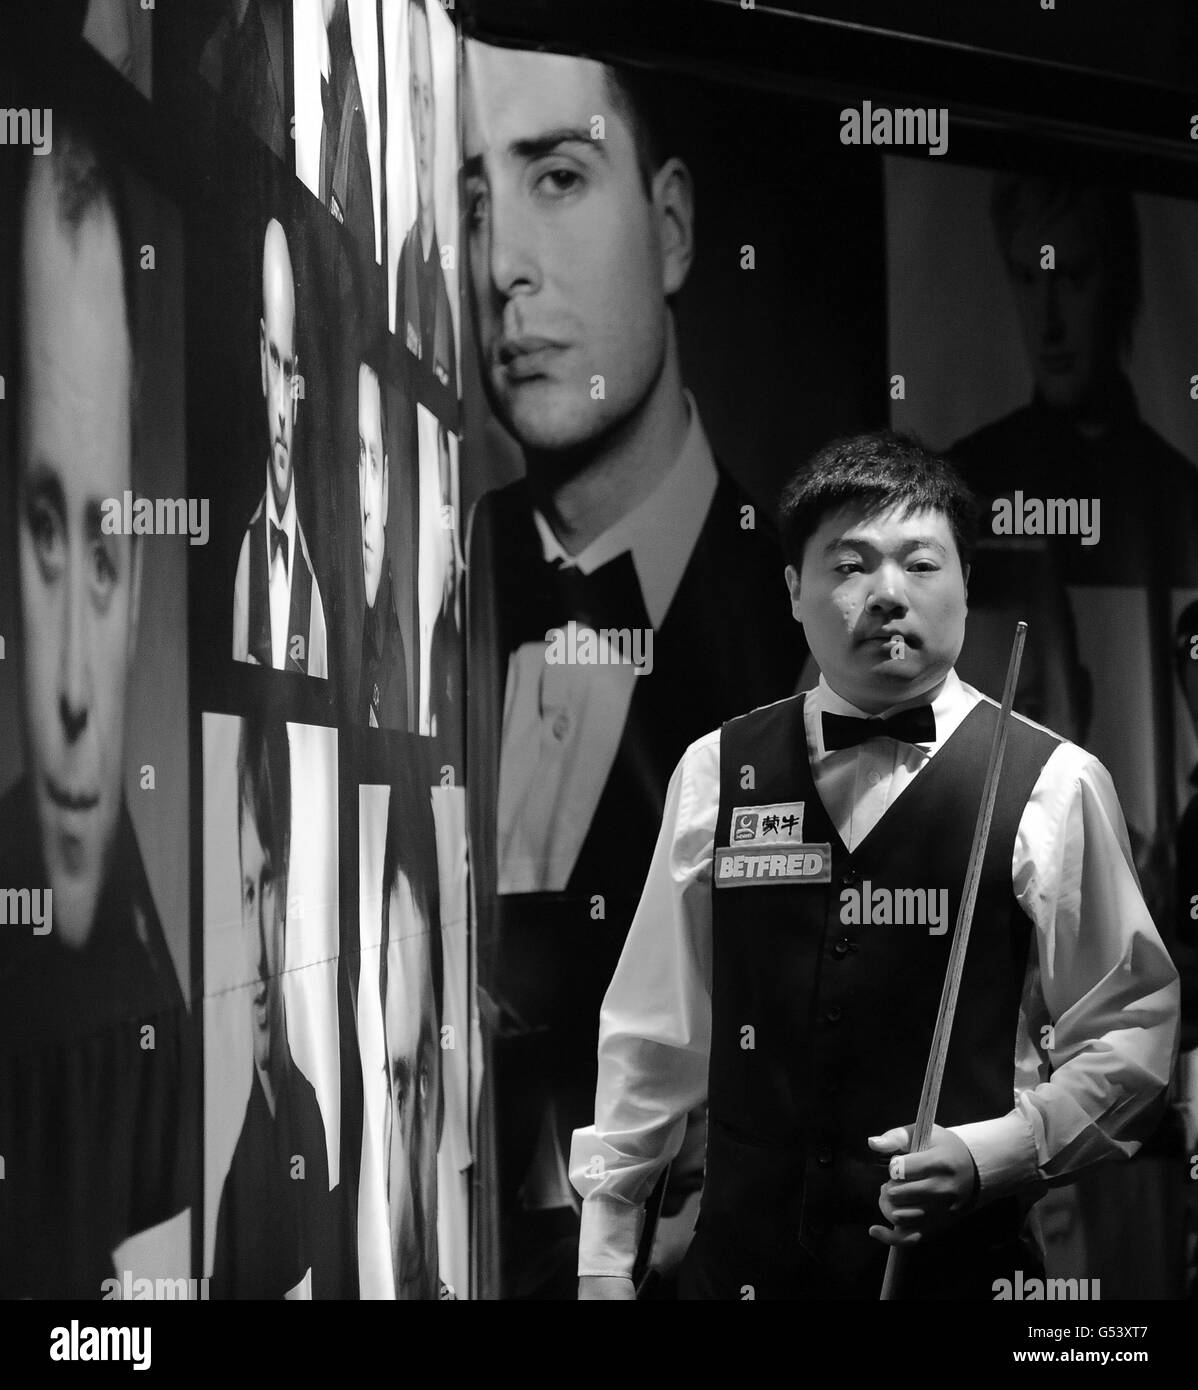 PICTURE CONVERTED TO BLACK AND WHITE China's Ding Junhui enters the arena for his first round match during the Betfred.com World Snooker Championships at the Crucible Theatre, Sheffield. Stock Photo